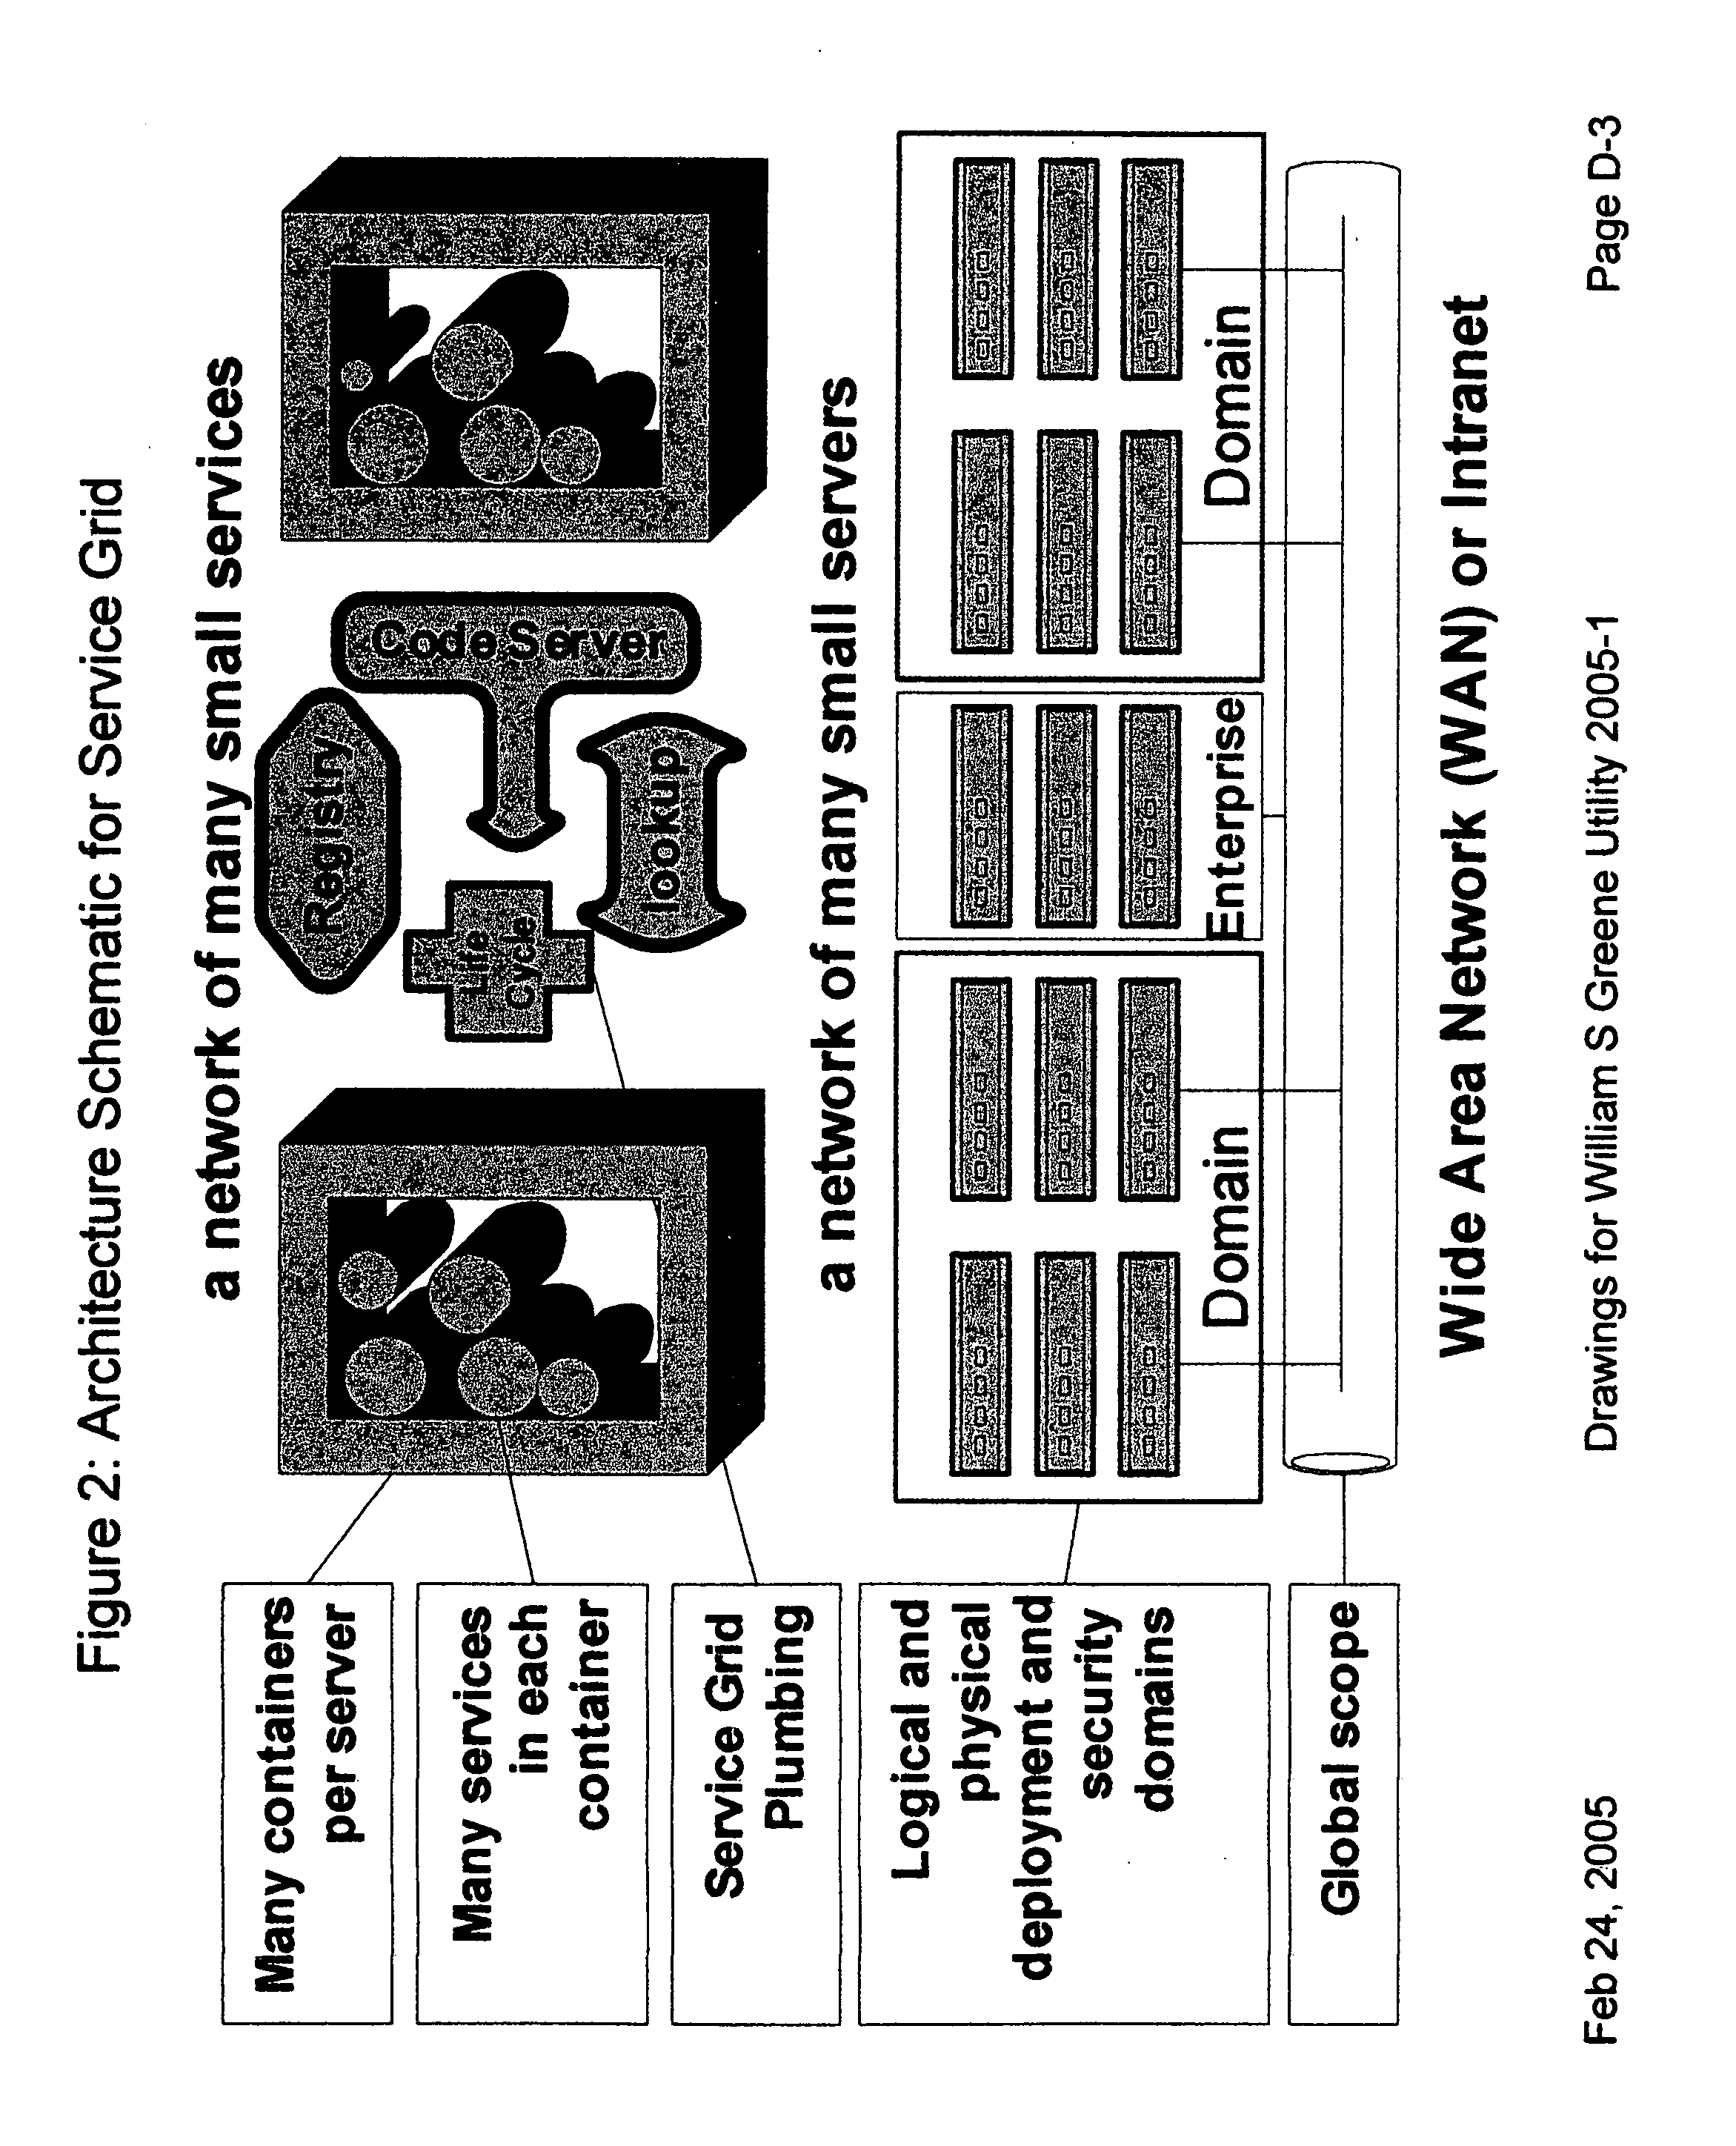 Providing secure data and policy exchange between domains in a multi-domain grid by use of a service ecosystem facilitating uses such as supply-chain integration with RIFD tagged items and barcodes